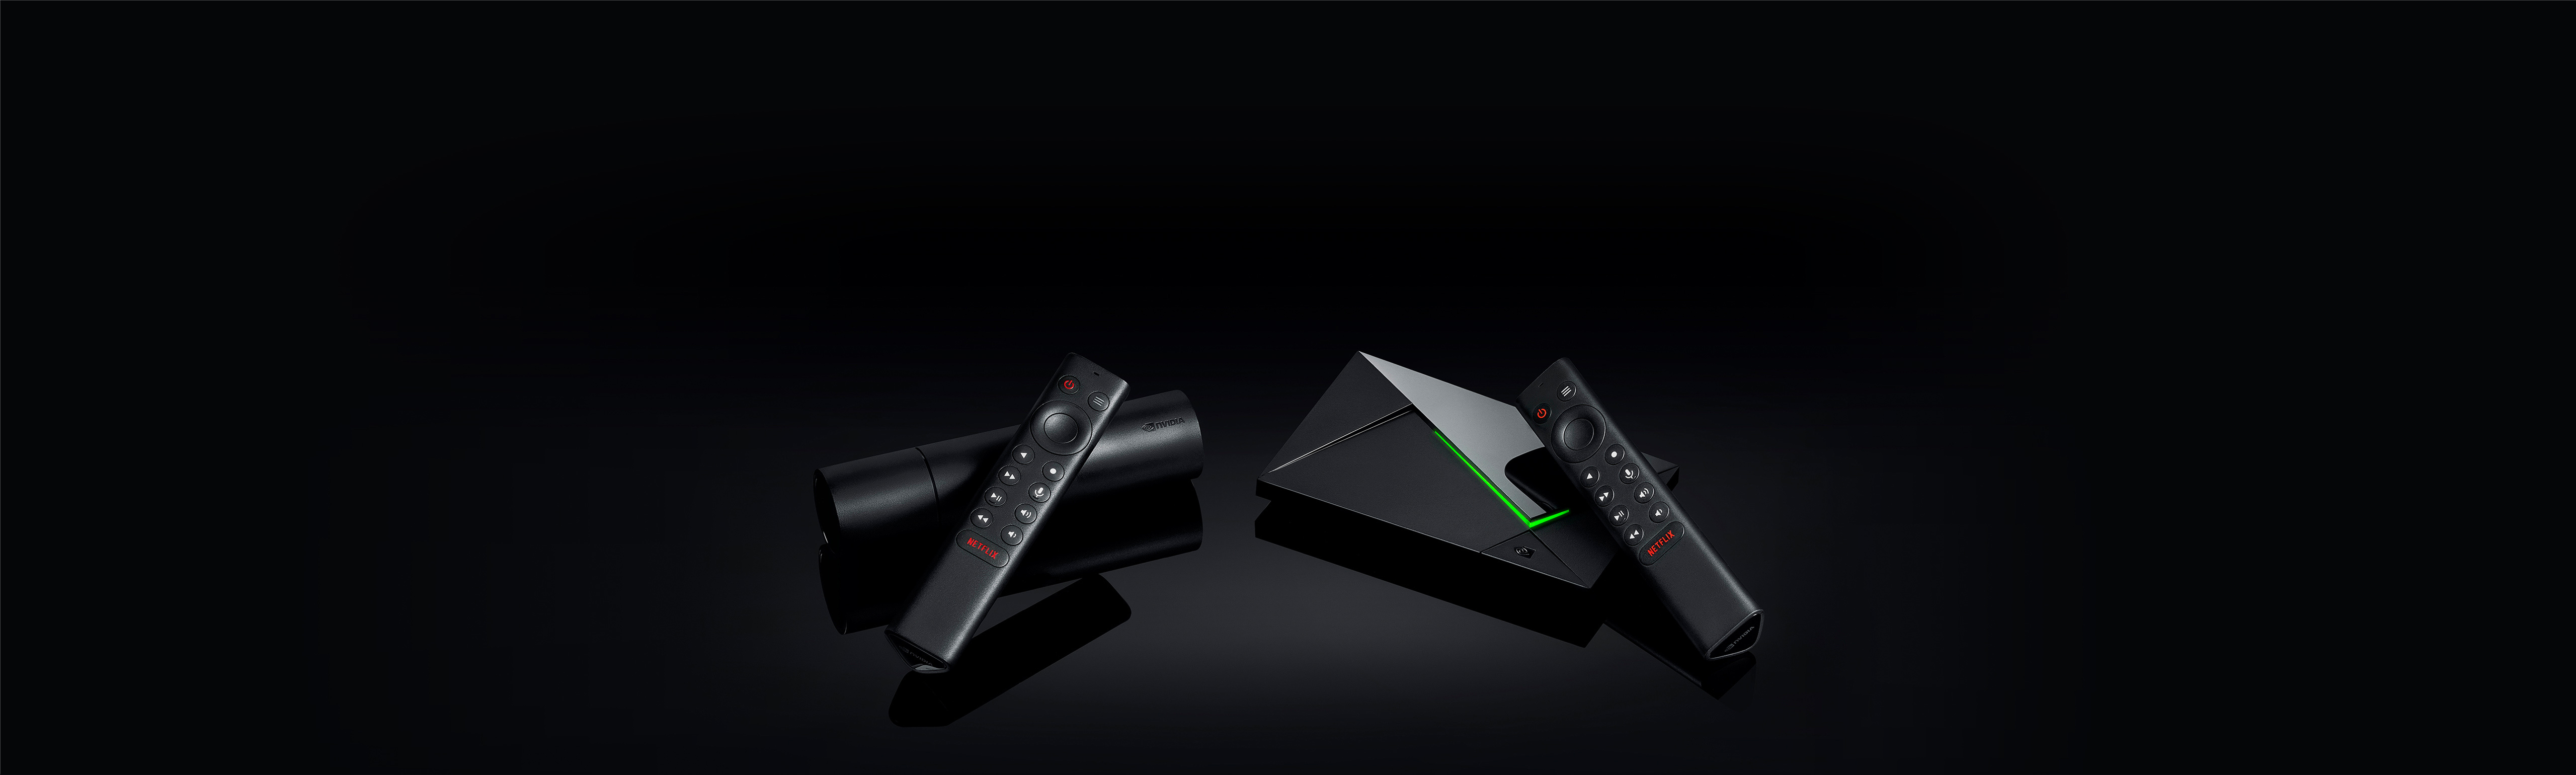 NVIDIA SHIELD TV - world-class media streaming performance! Faster,  smarter, an all-new design. 